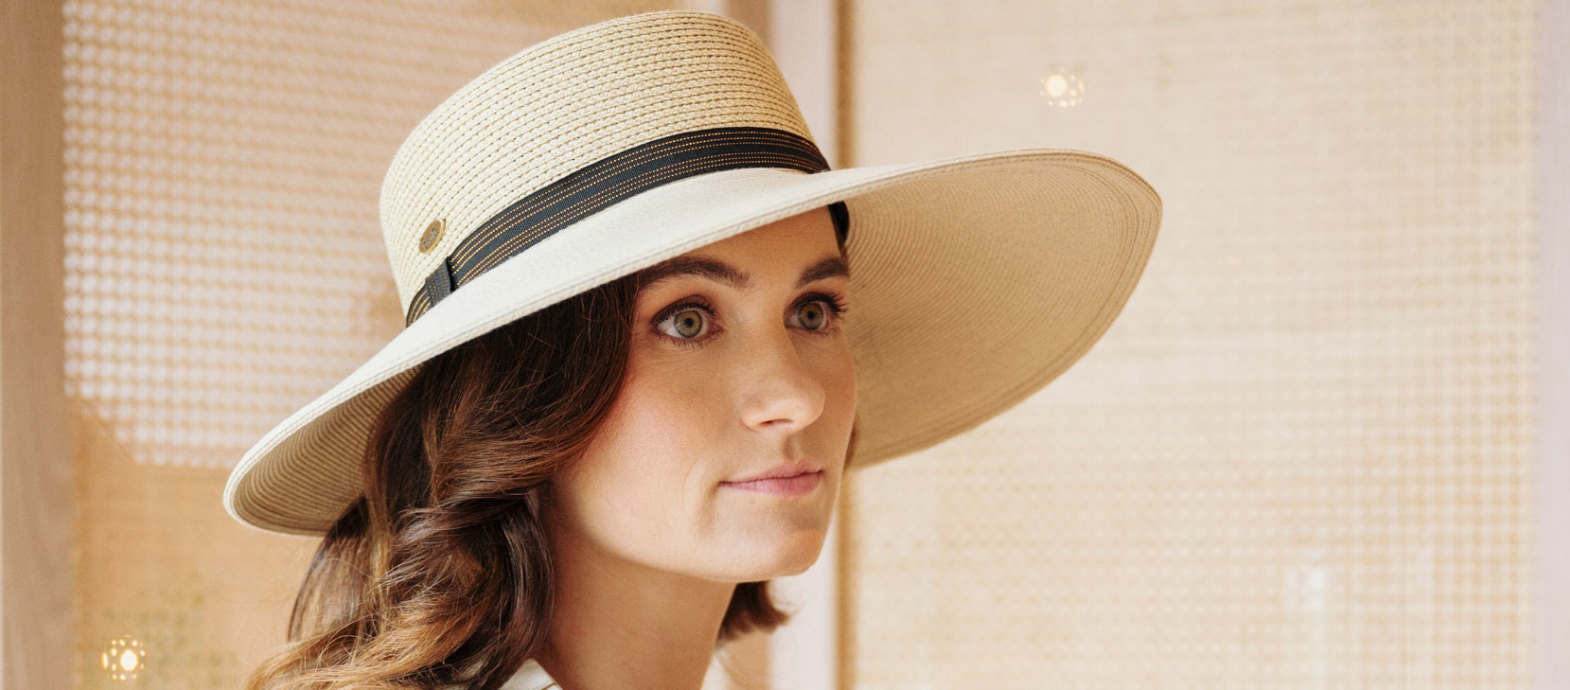 Bronté Amsterdam summer collection including all new styles like Harper, a two tone boater hat